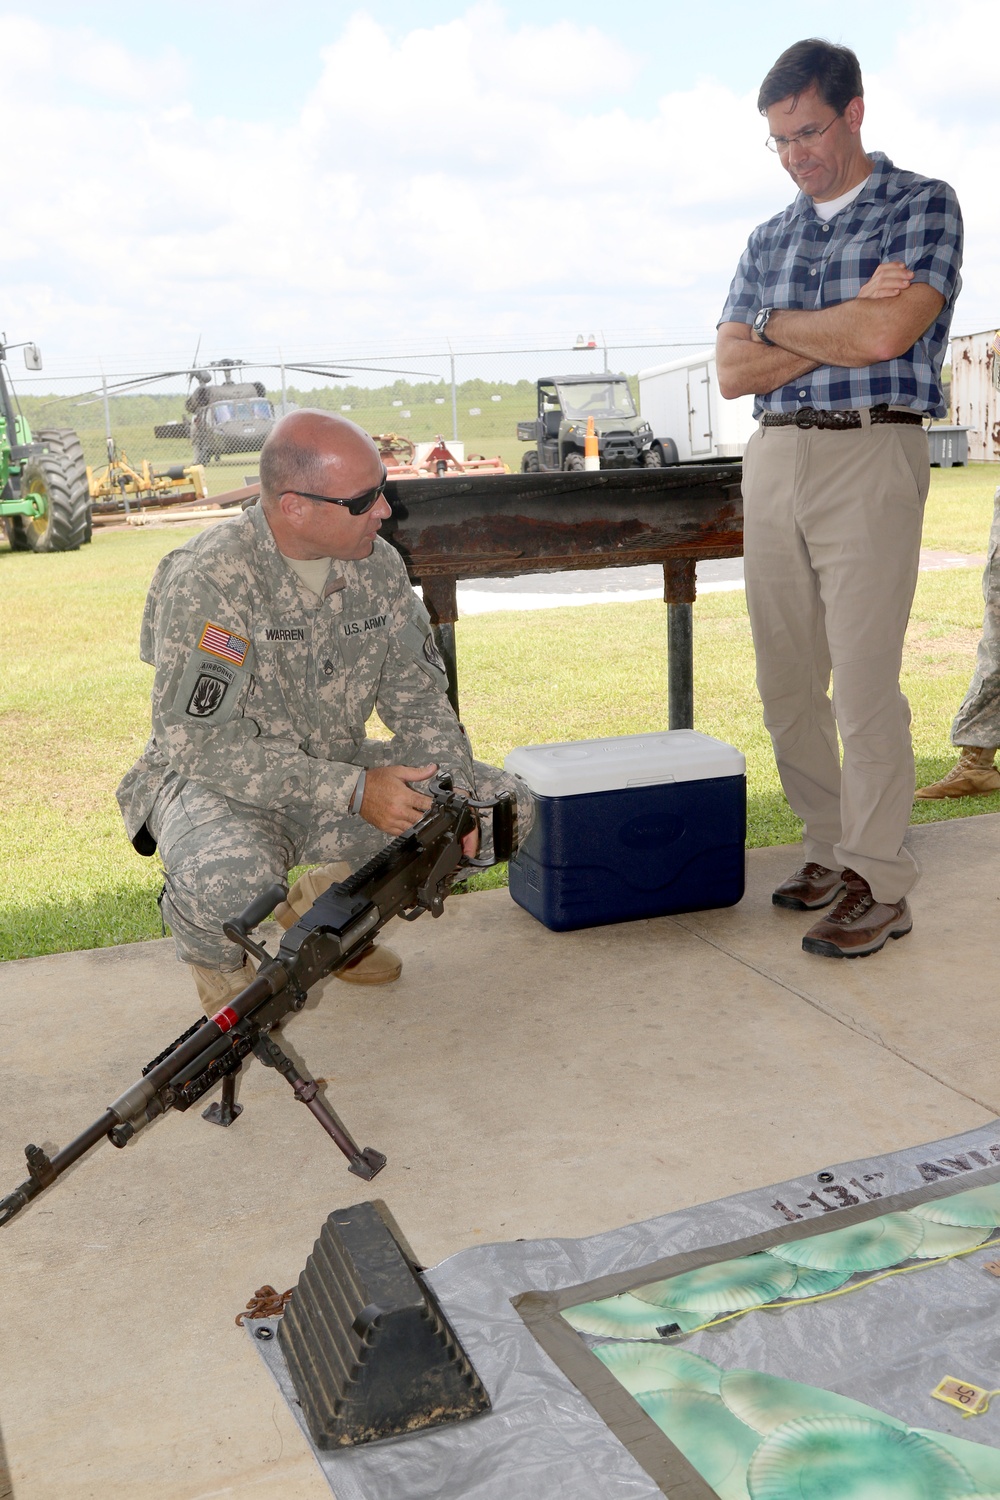 Secretary of Army Esper Receives Weapon Safety Briefing